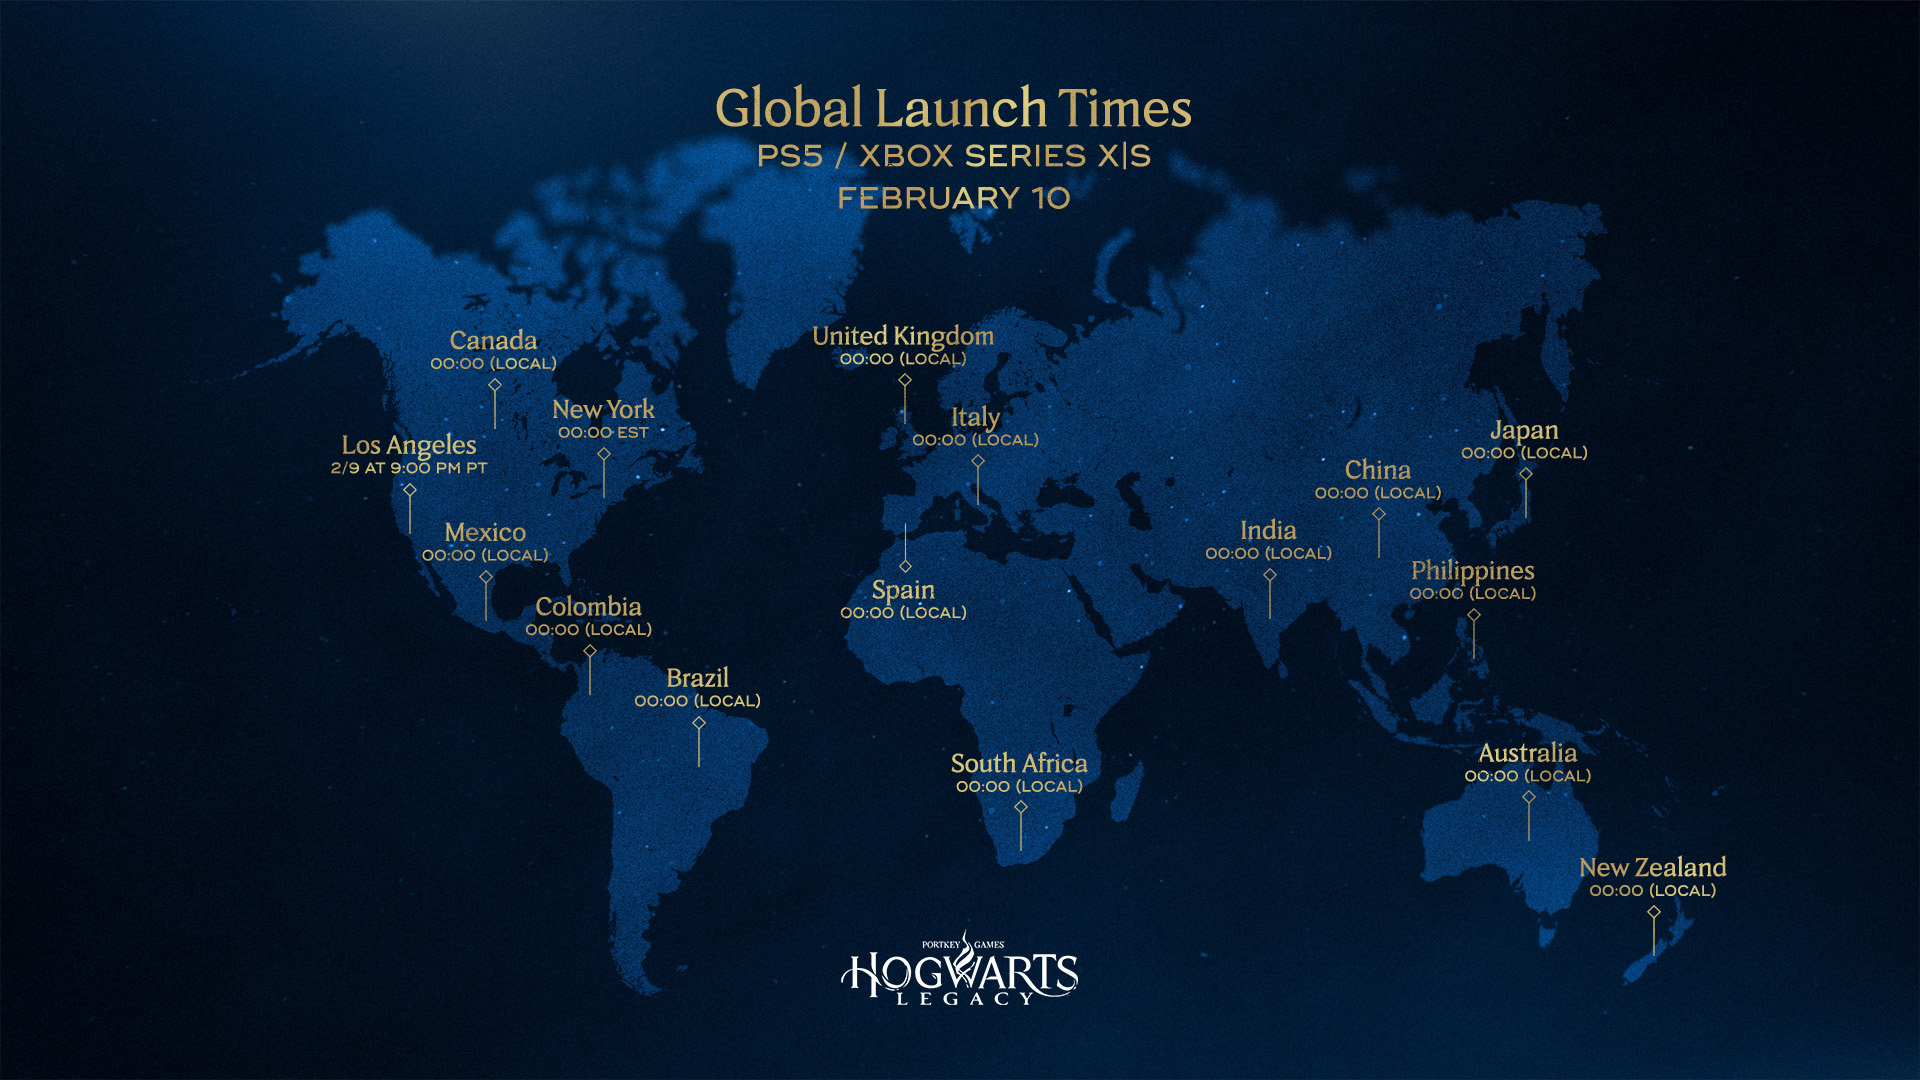 Hogwarts legacy launch time 2